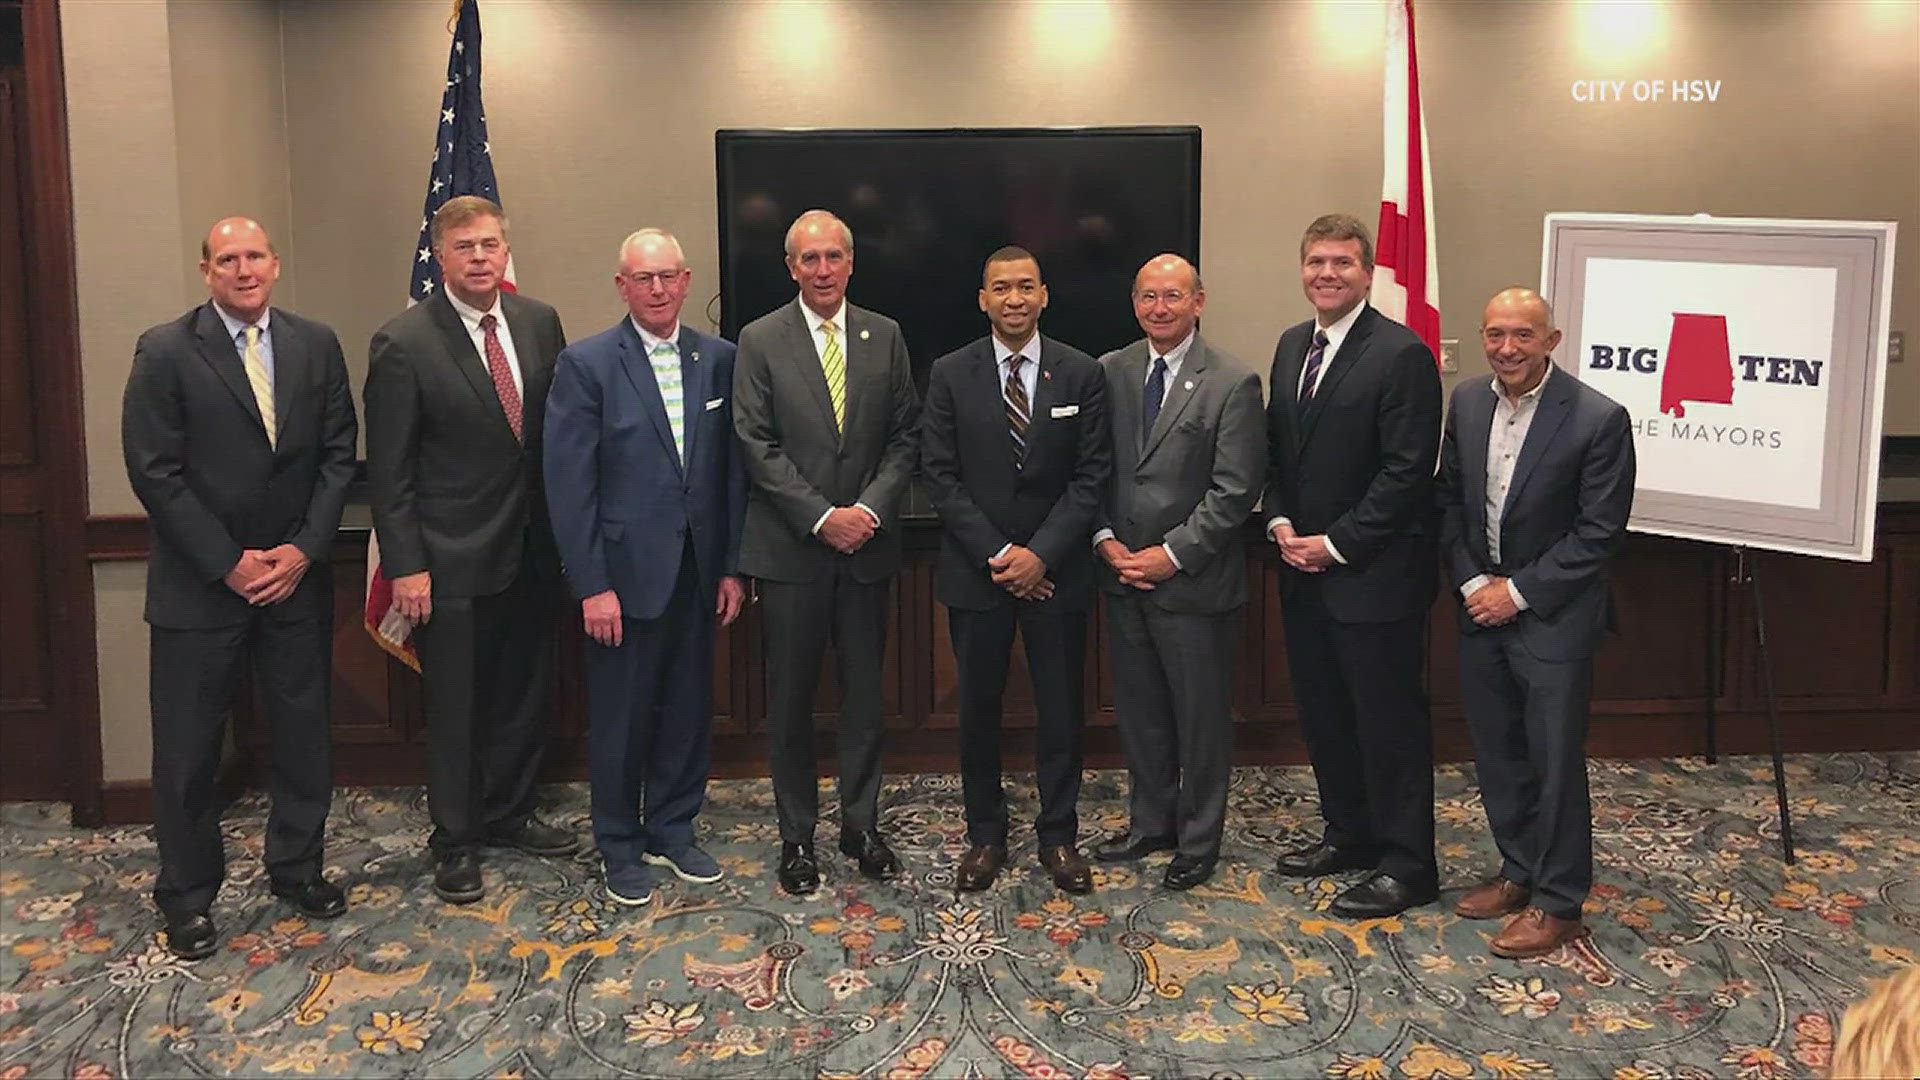 The Alabama Big 10 Mayors, who collectively represent around 75 percent of Alabama residents in their metro areas, met this week in Birmingham.